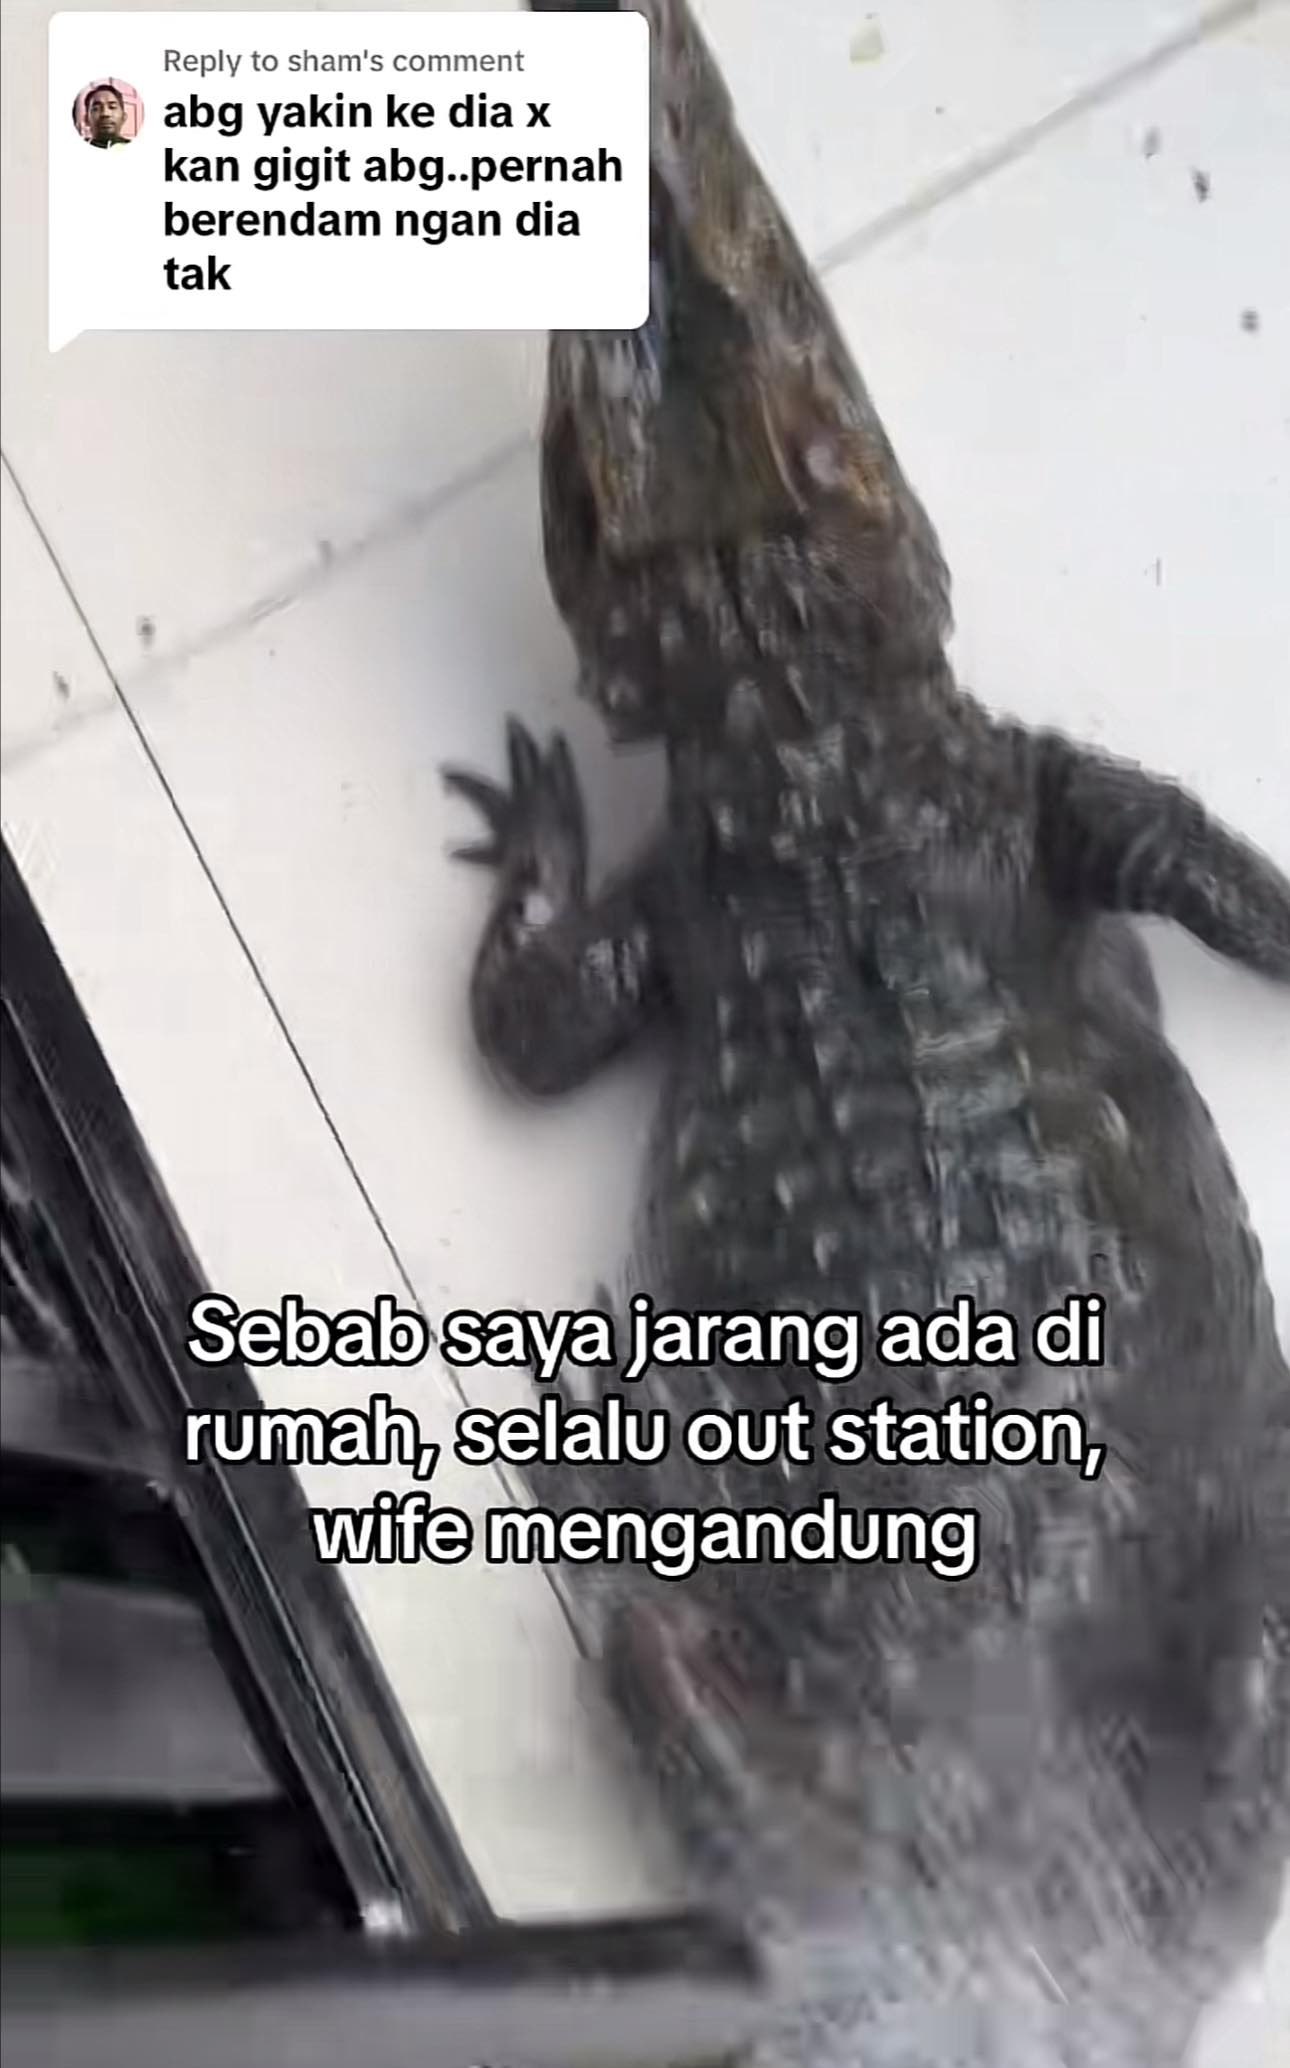 Crocodile owner explains why its hard for him to take care of his crocodiles